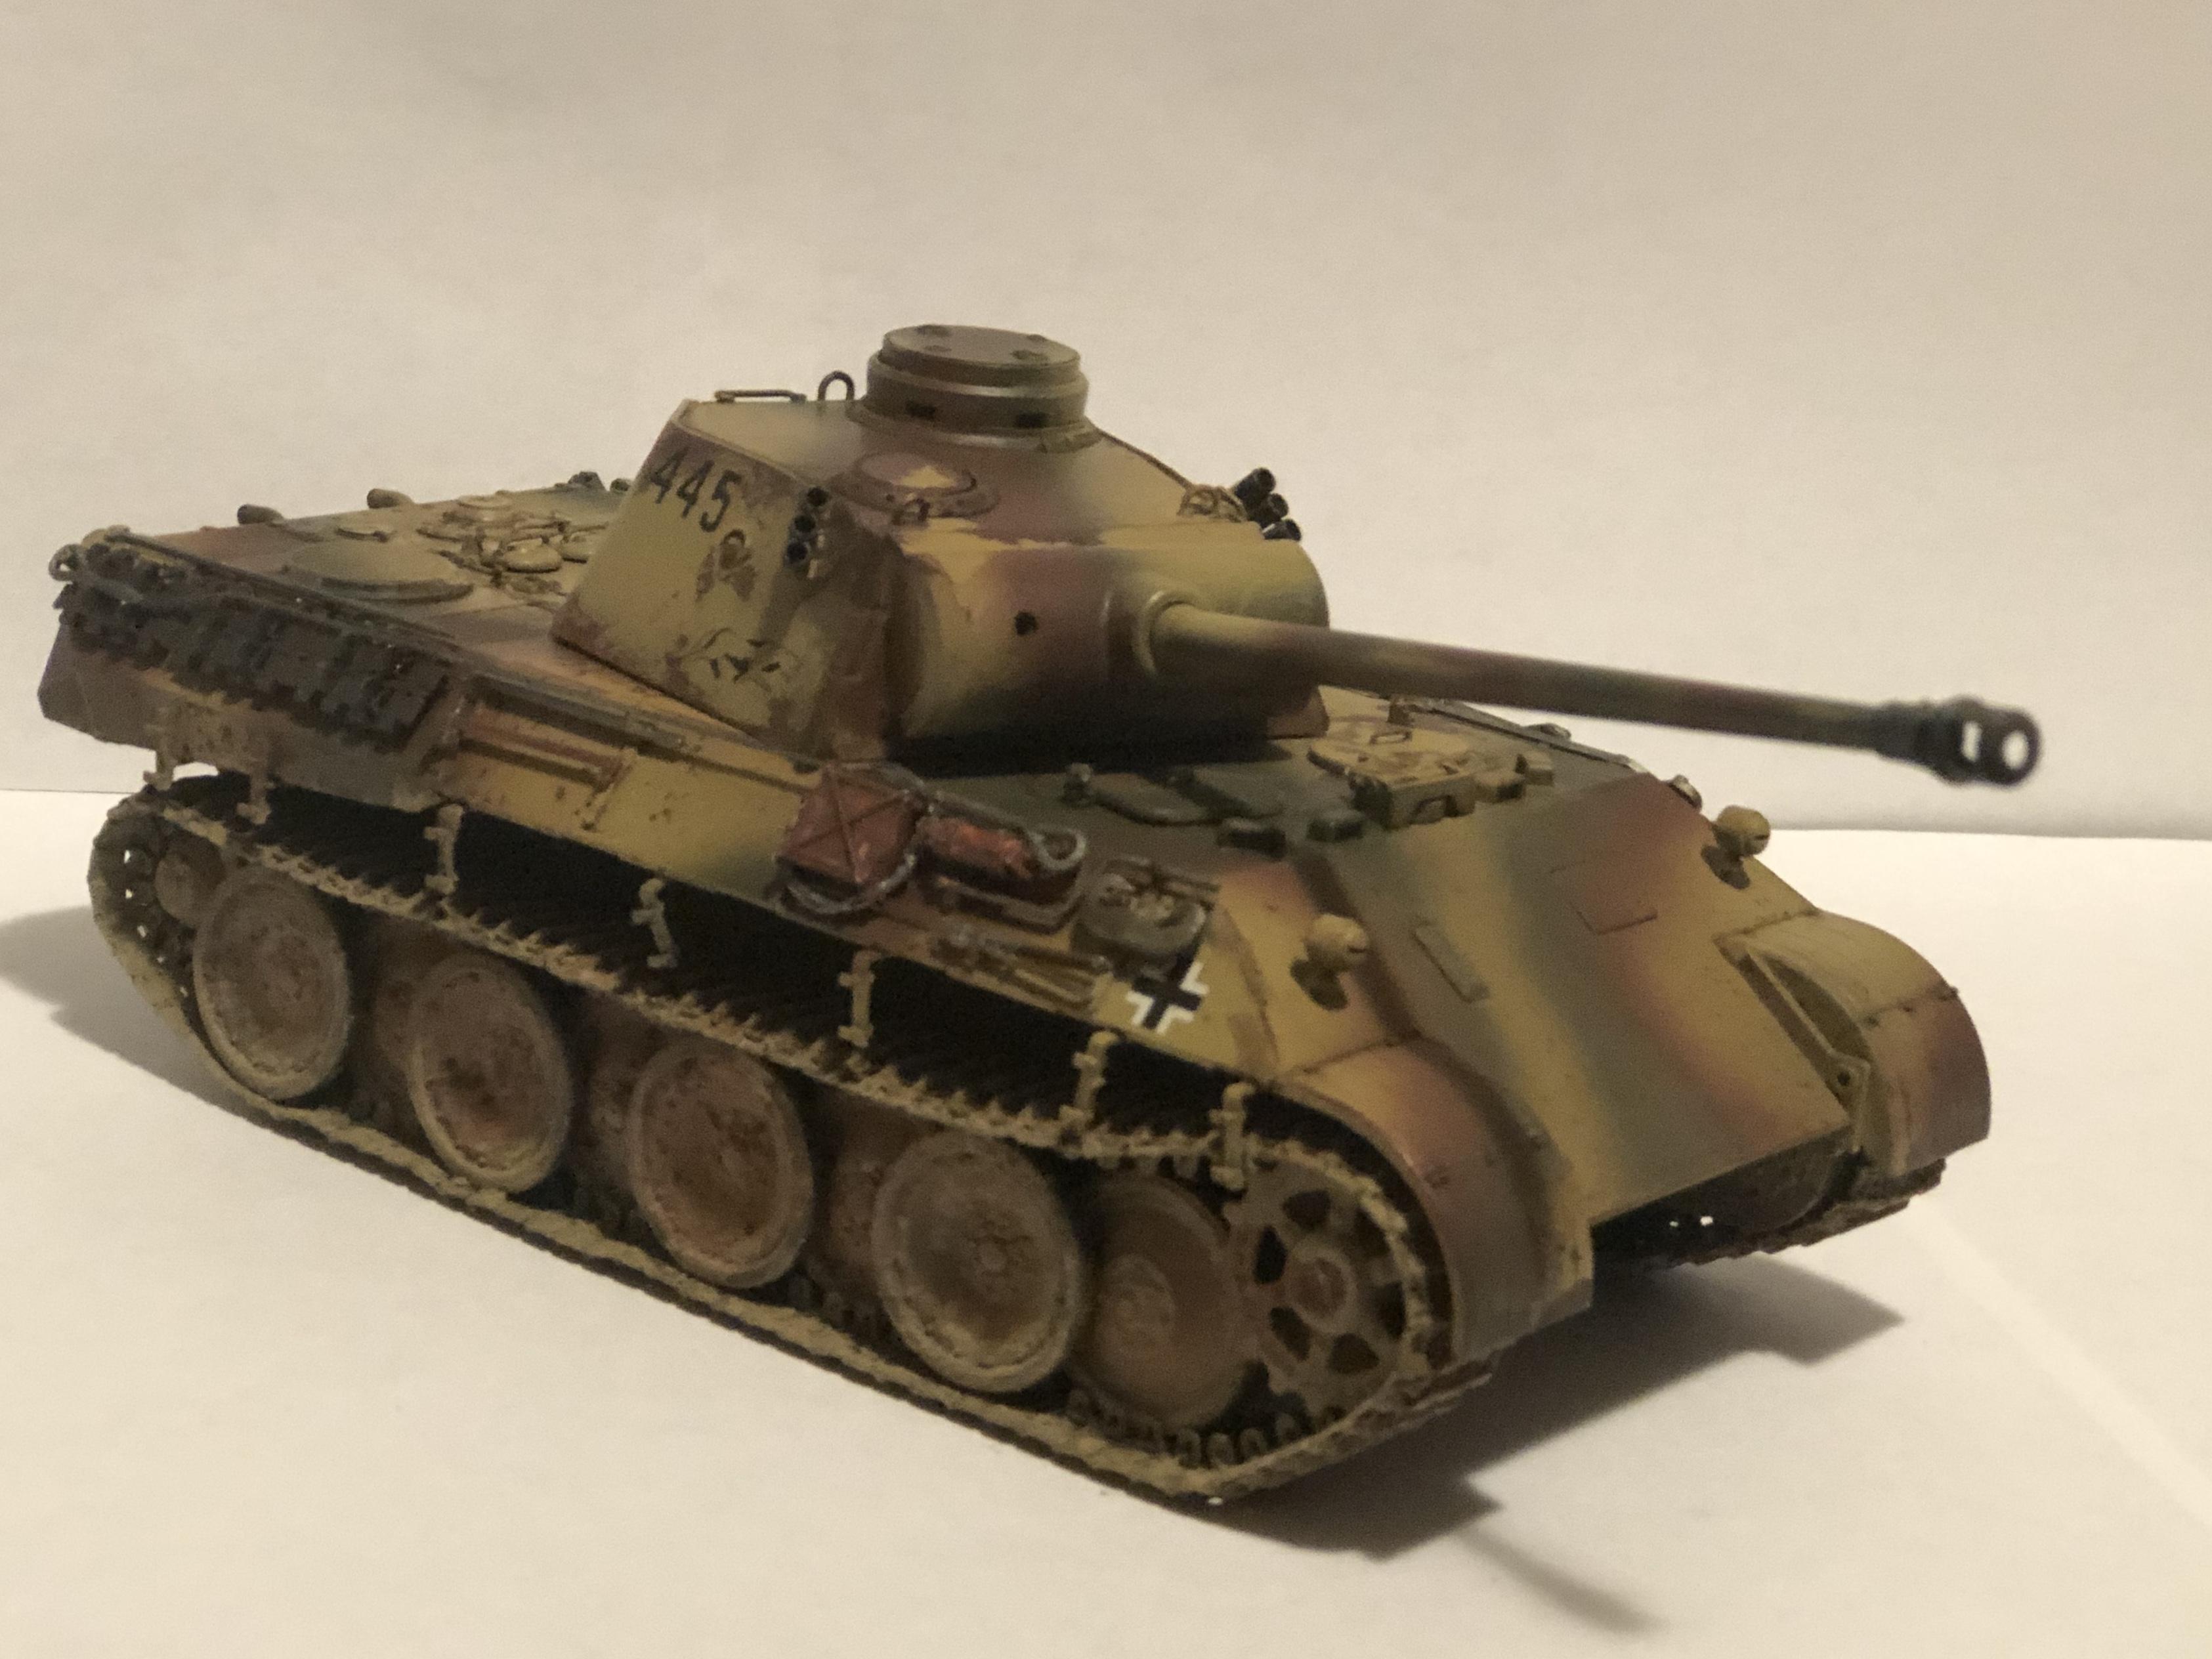 I built a tank - WIP: All The Rest: Motorcycles, Aviation, Military ...